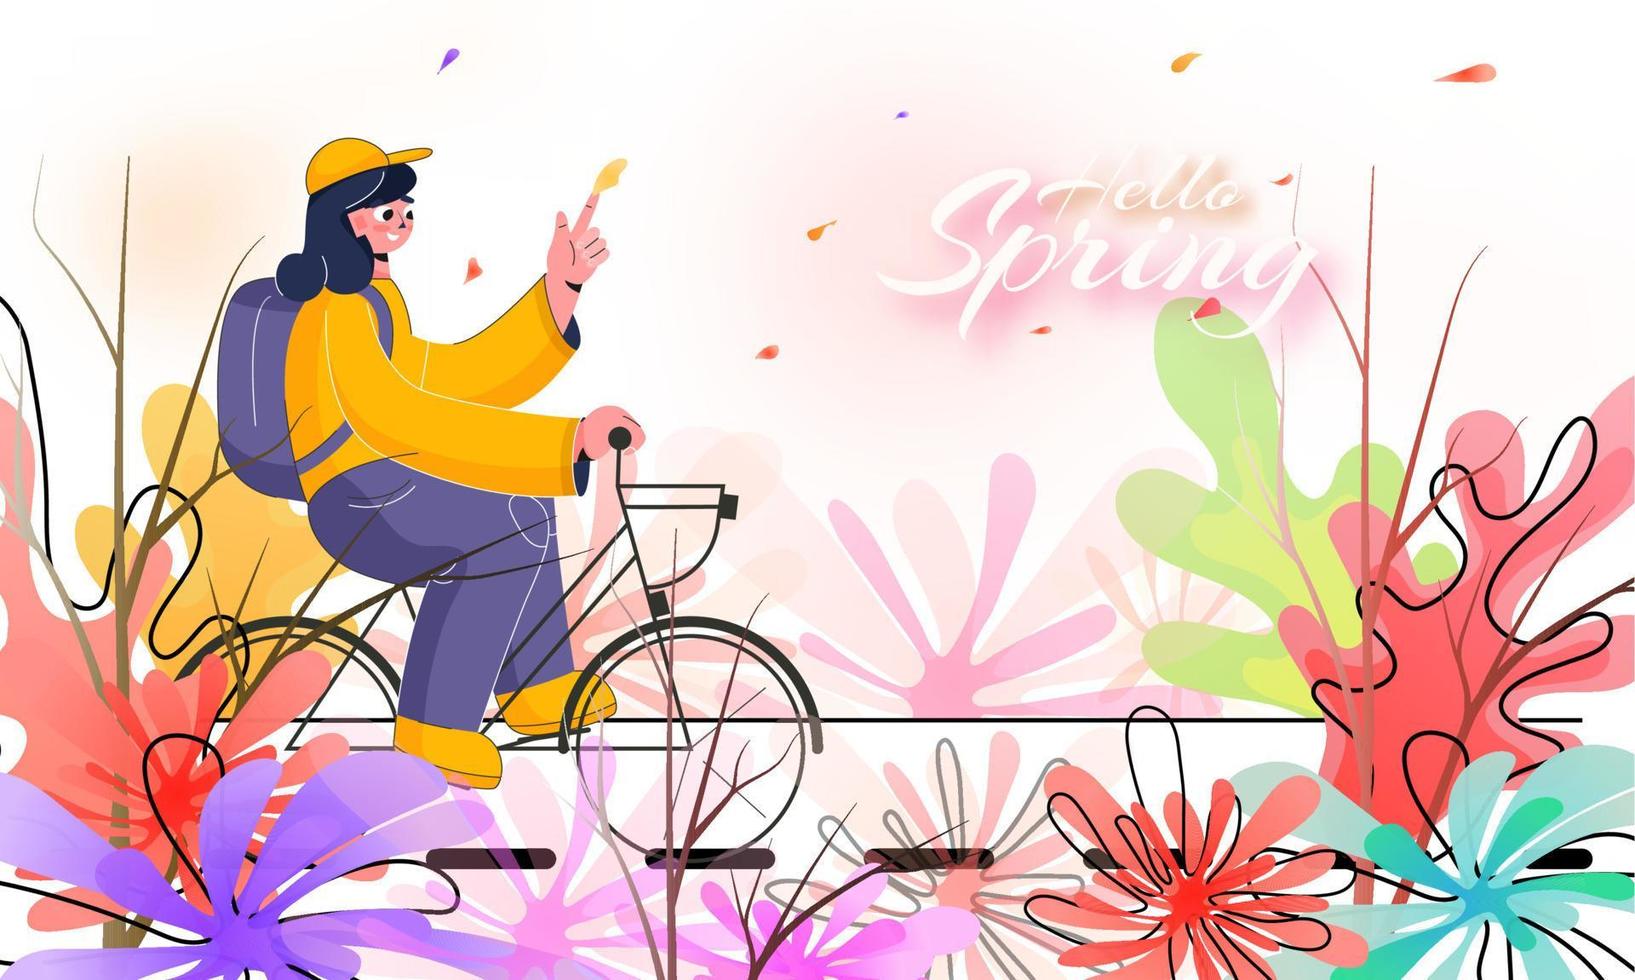 Young Girl Riding a Bicycle with a Backpack on Colorful Flowers Background for Hello Spring. vector